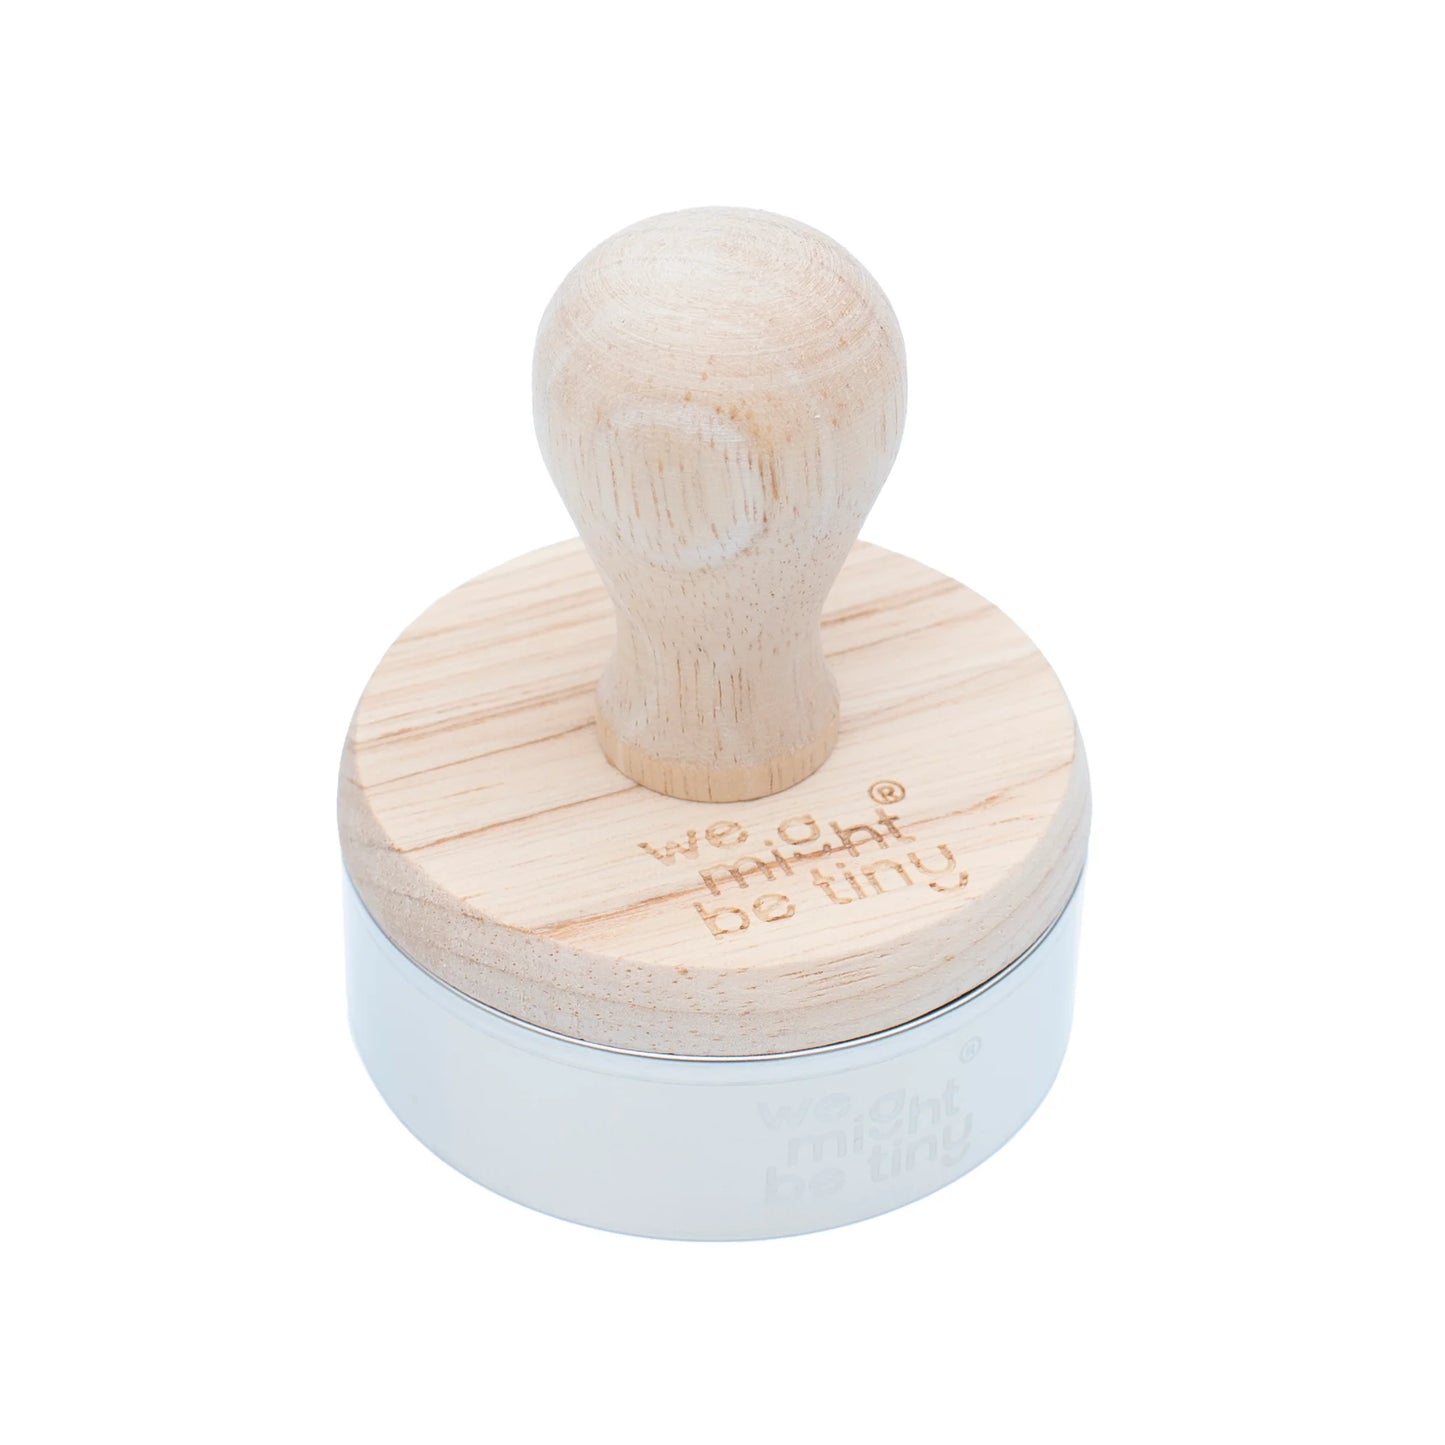 WE MIGHT BE TINY - WOODEN STAMPER FOR STAMPIES